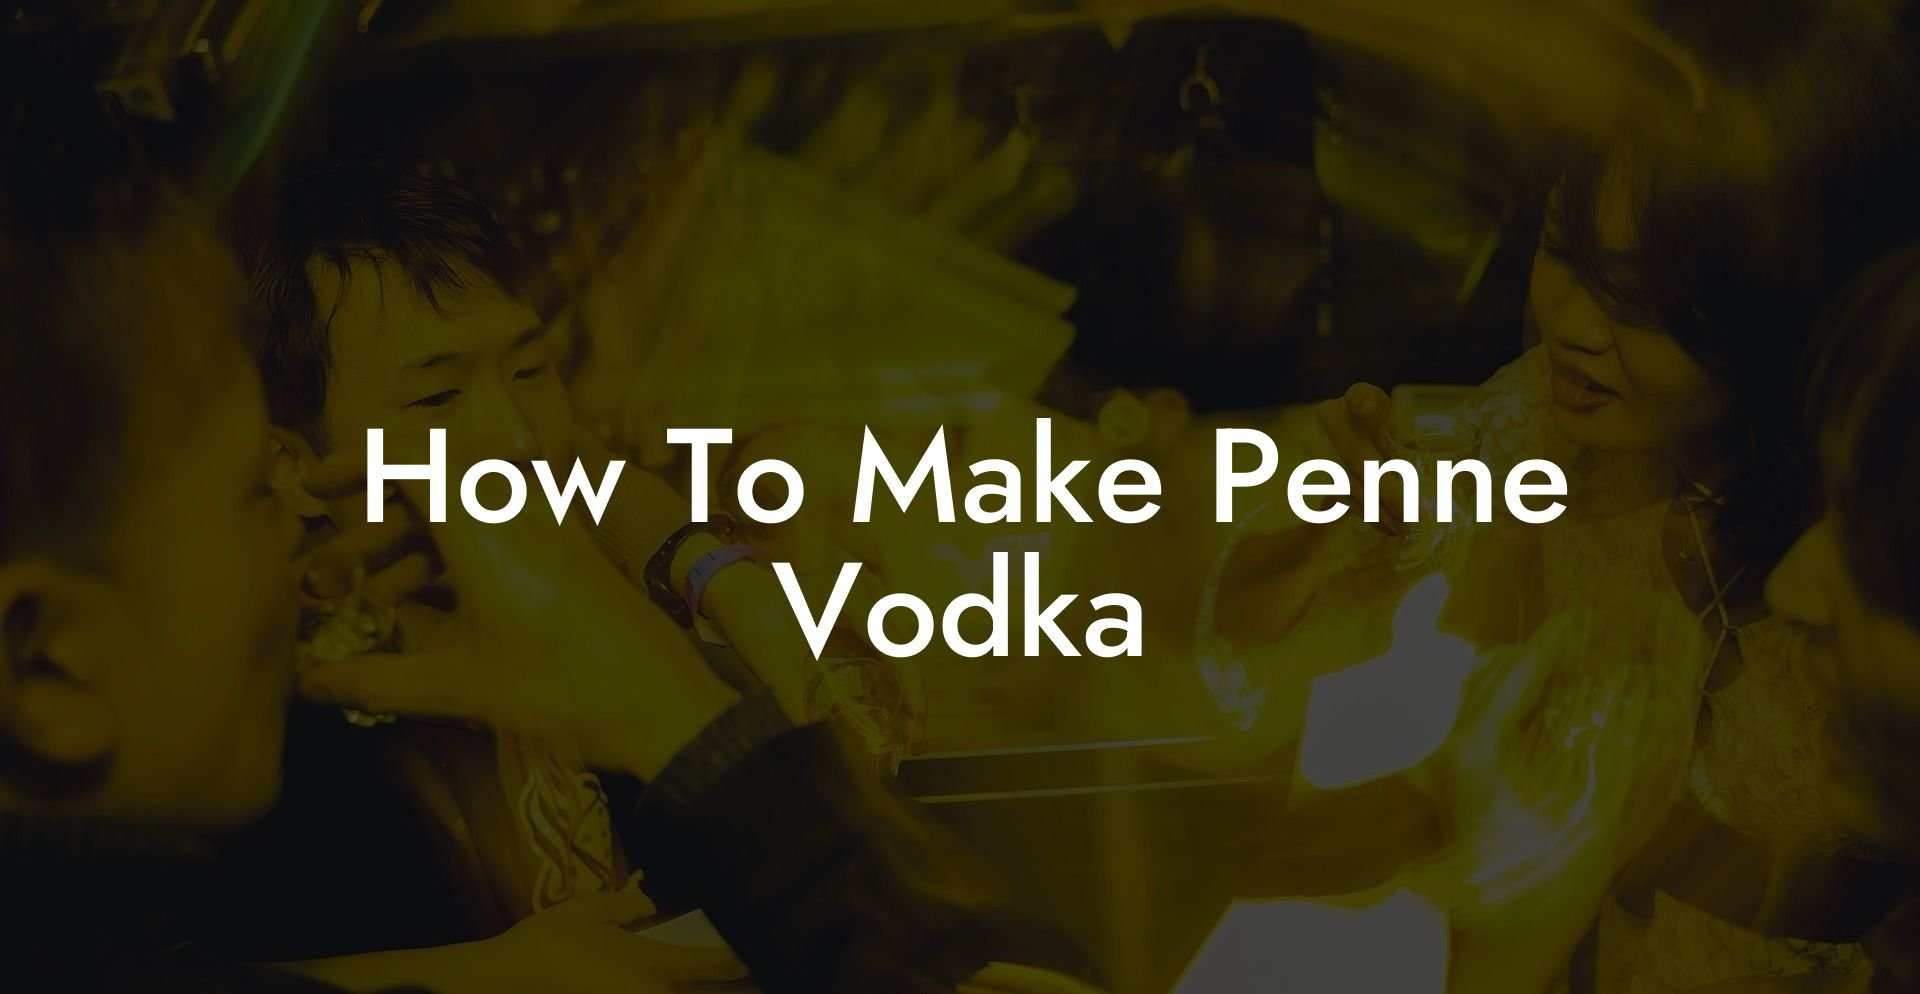 How To Make Penne Vodka